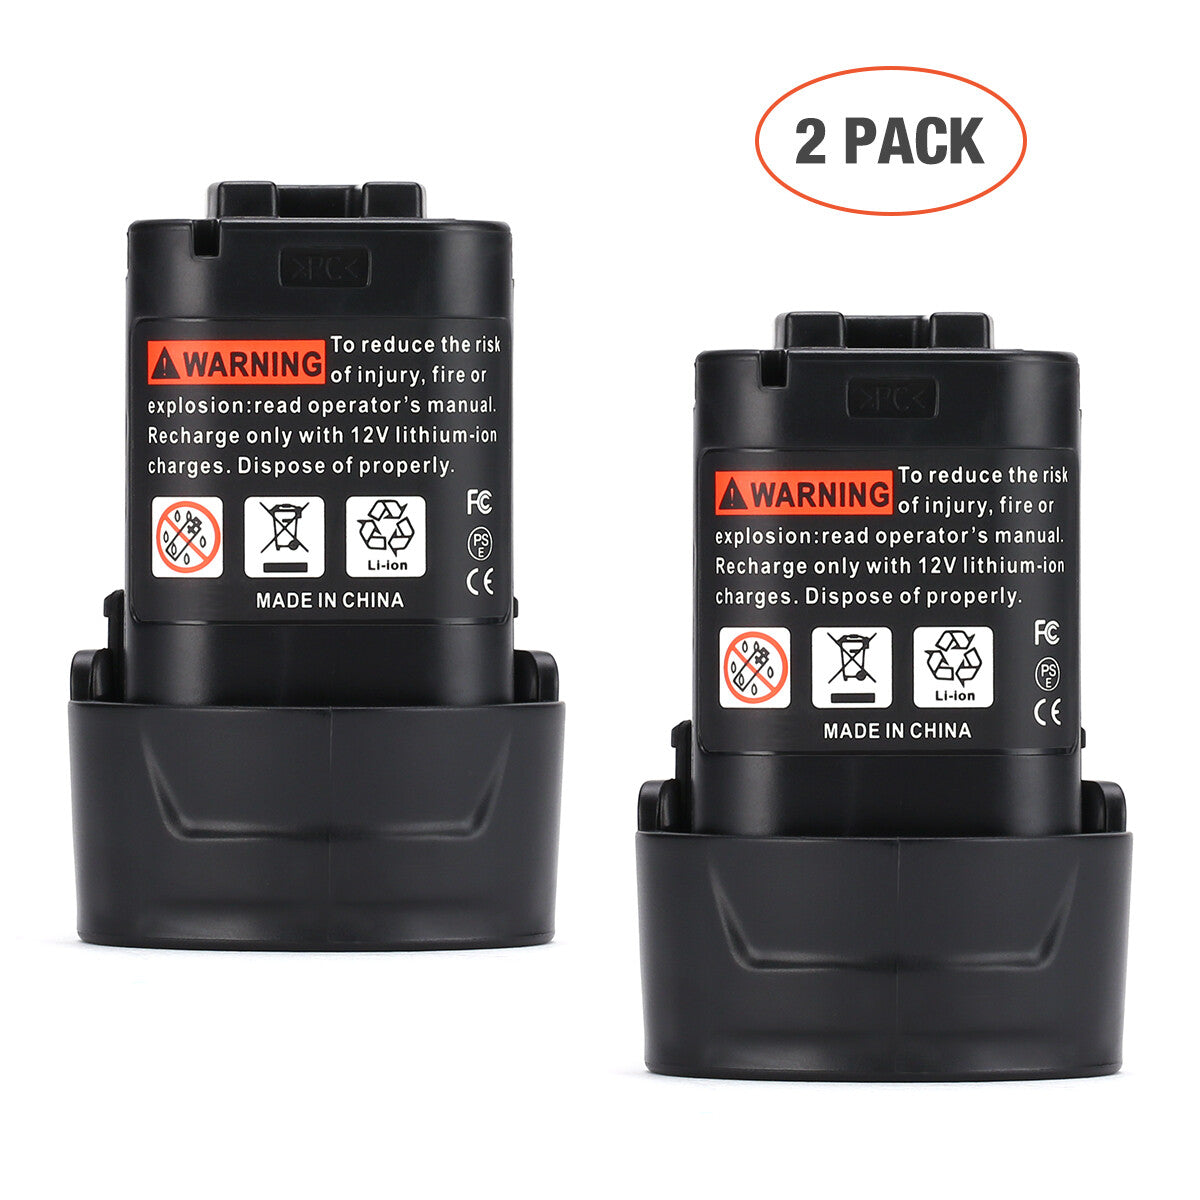 2Pack 10.8V 3500mAh Li-ion Replacement Battery For MAKITA BL1013 BL1014 194550-6 194551-4 195332-9